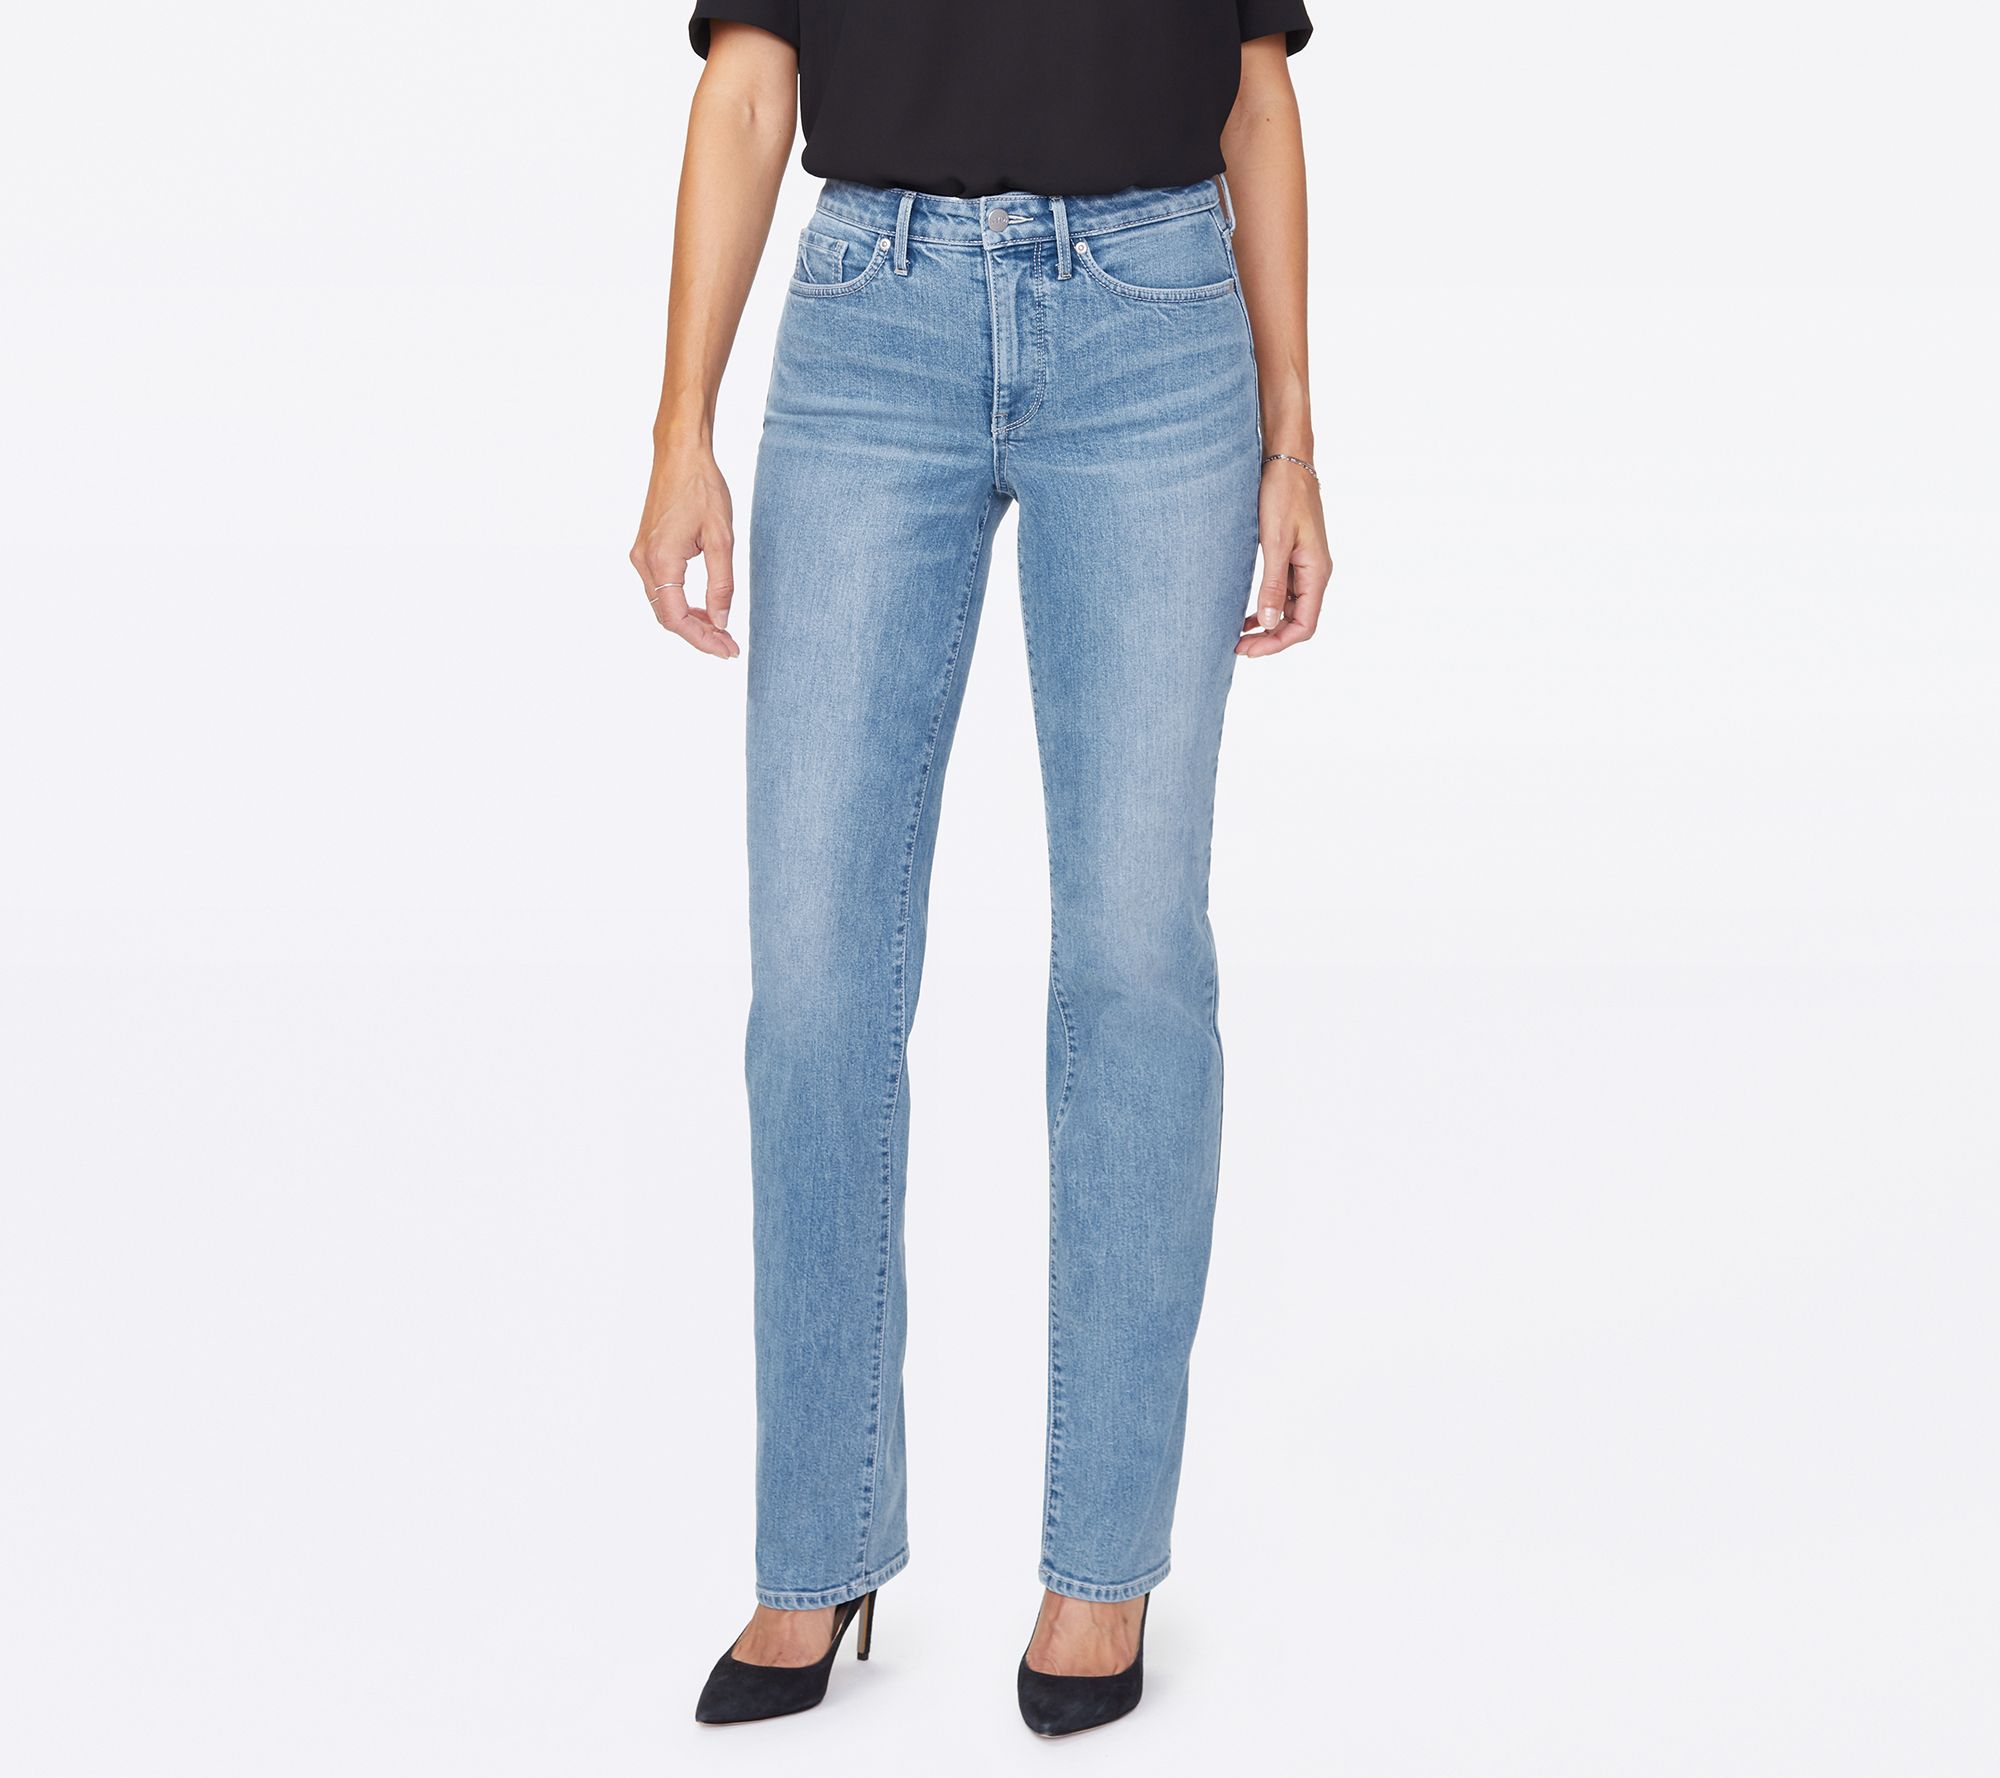 NYDJ Relaxed Straight Jeans - Juno - QVC.com